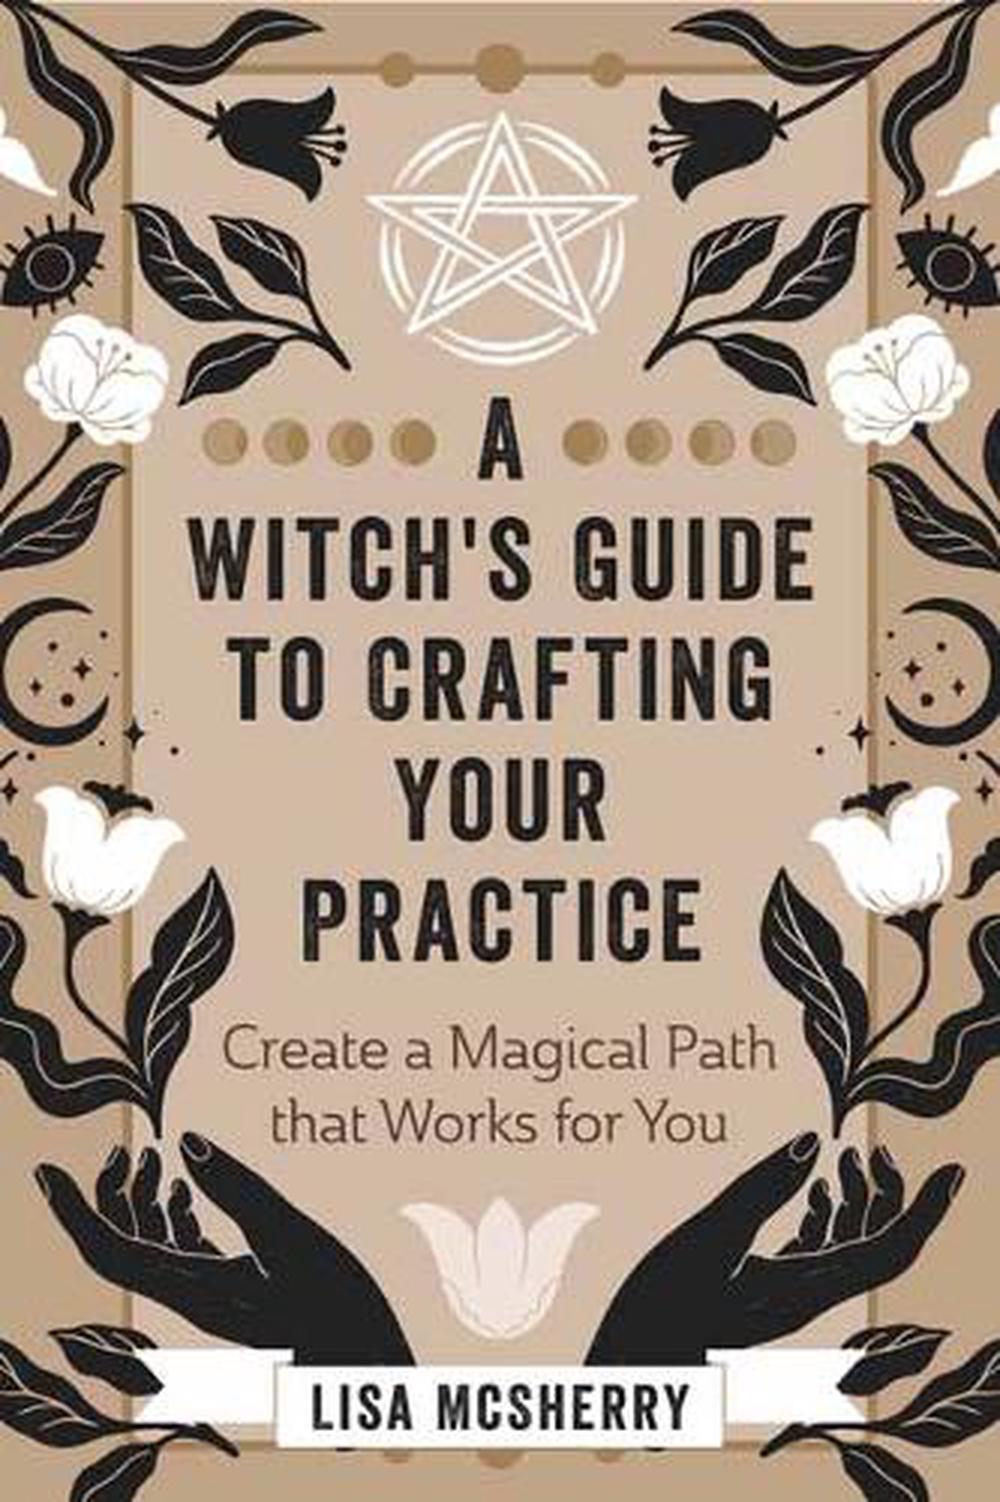 A witches guide to crafting your practice - Rivendell Shop